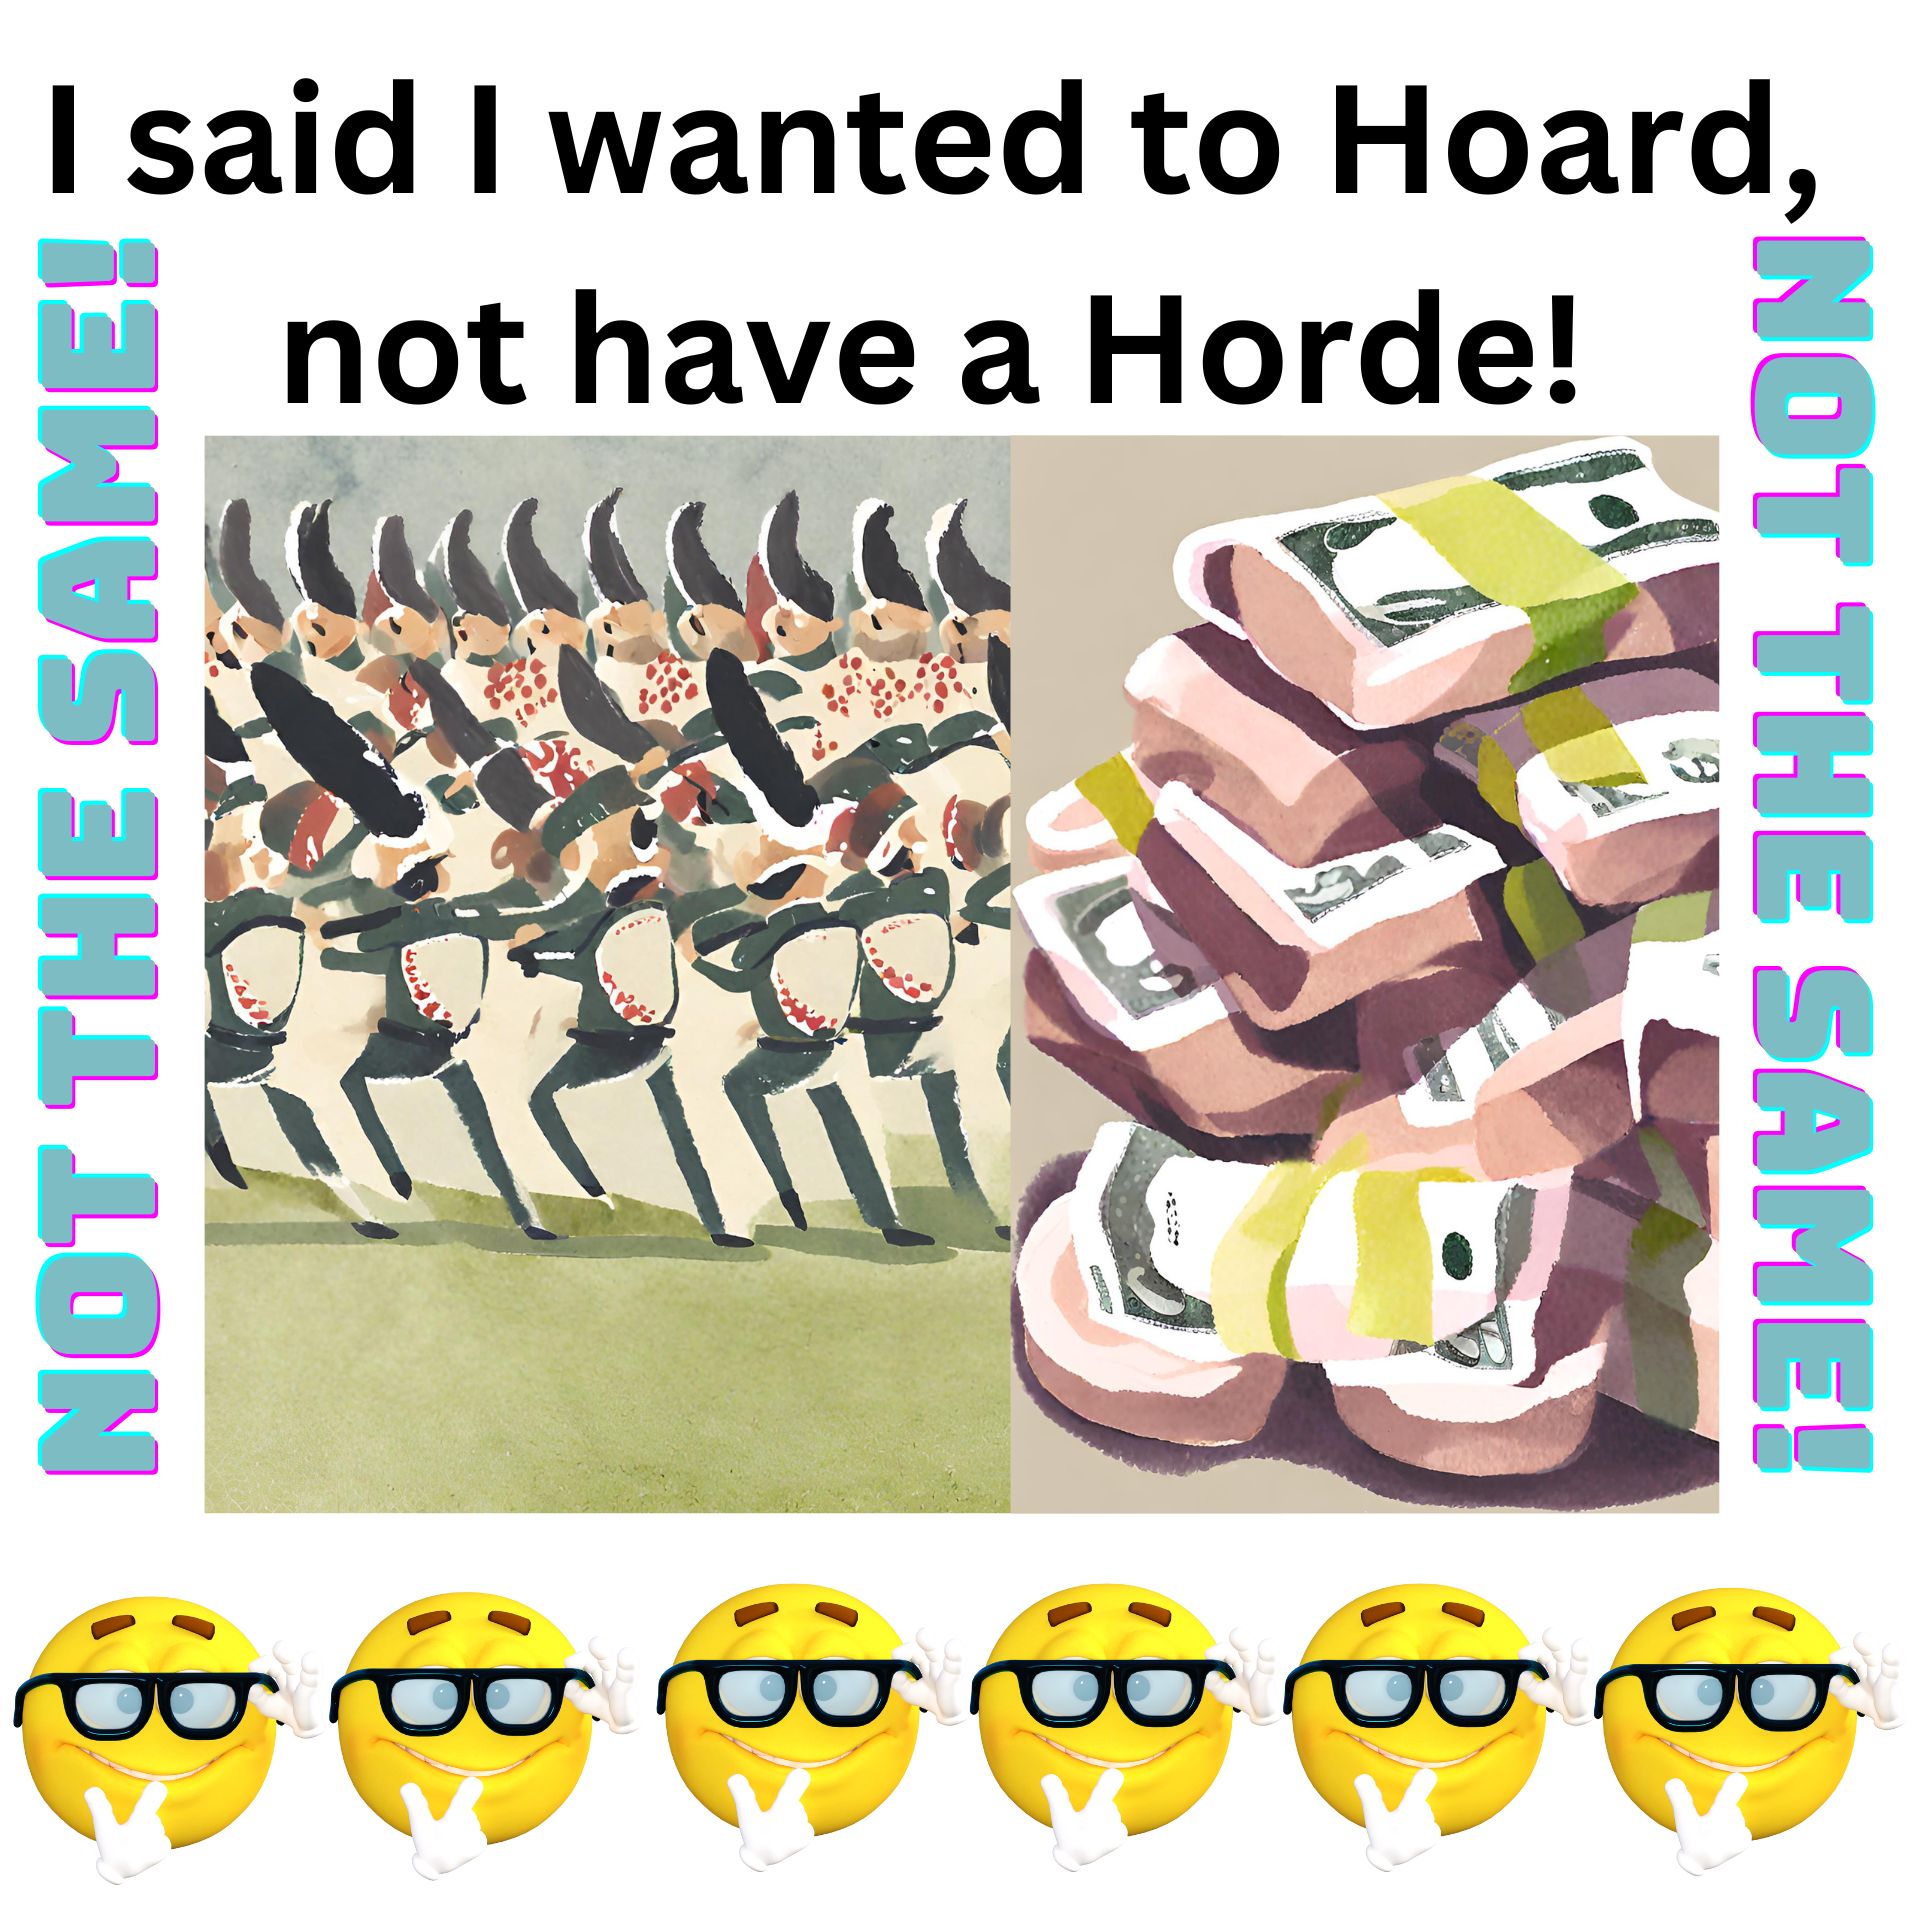 graphic showing horde vs hoard with a hoard of money and a army horde.